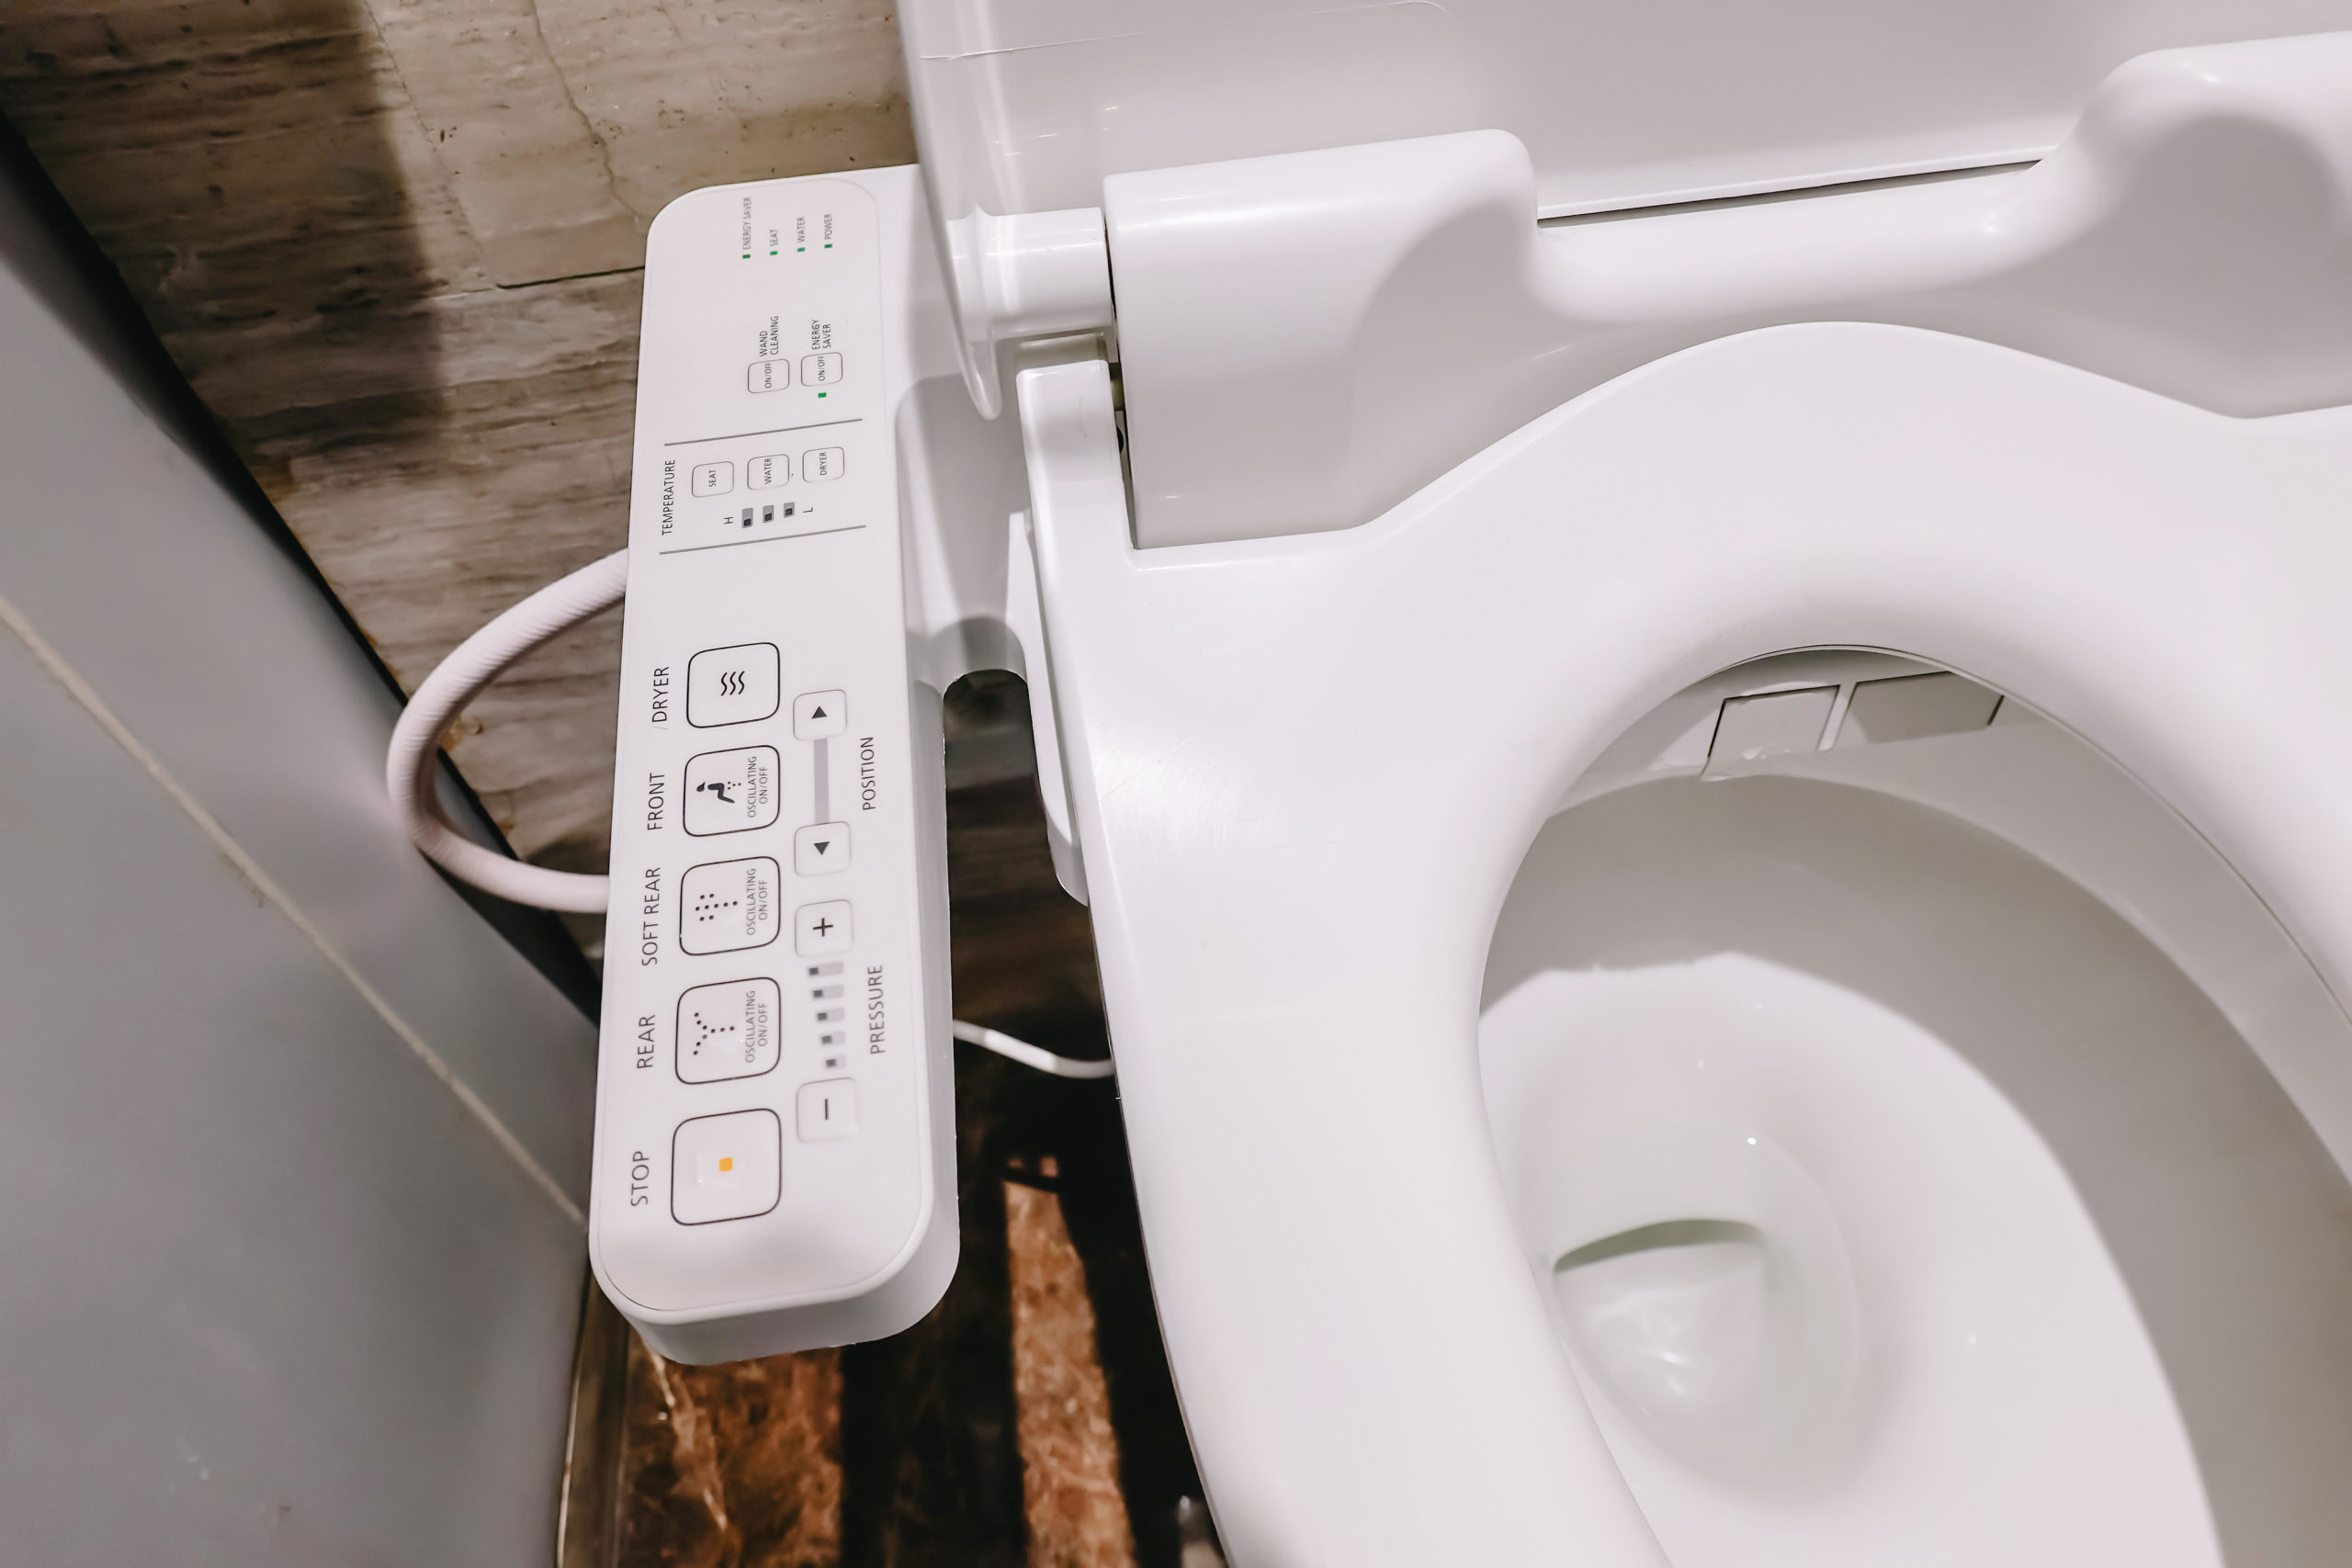 A bidet seat with arm controls the options on the arm controls read: stop, rear, soft rear, front, dryer